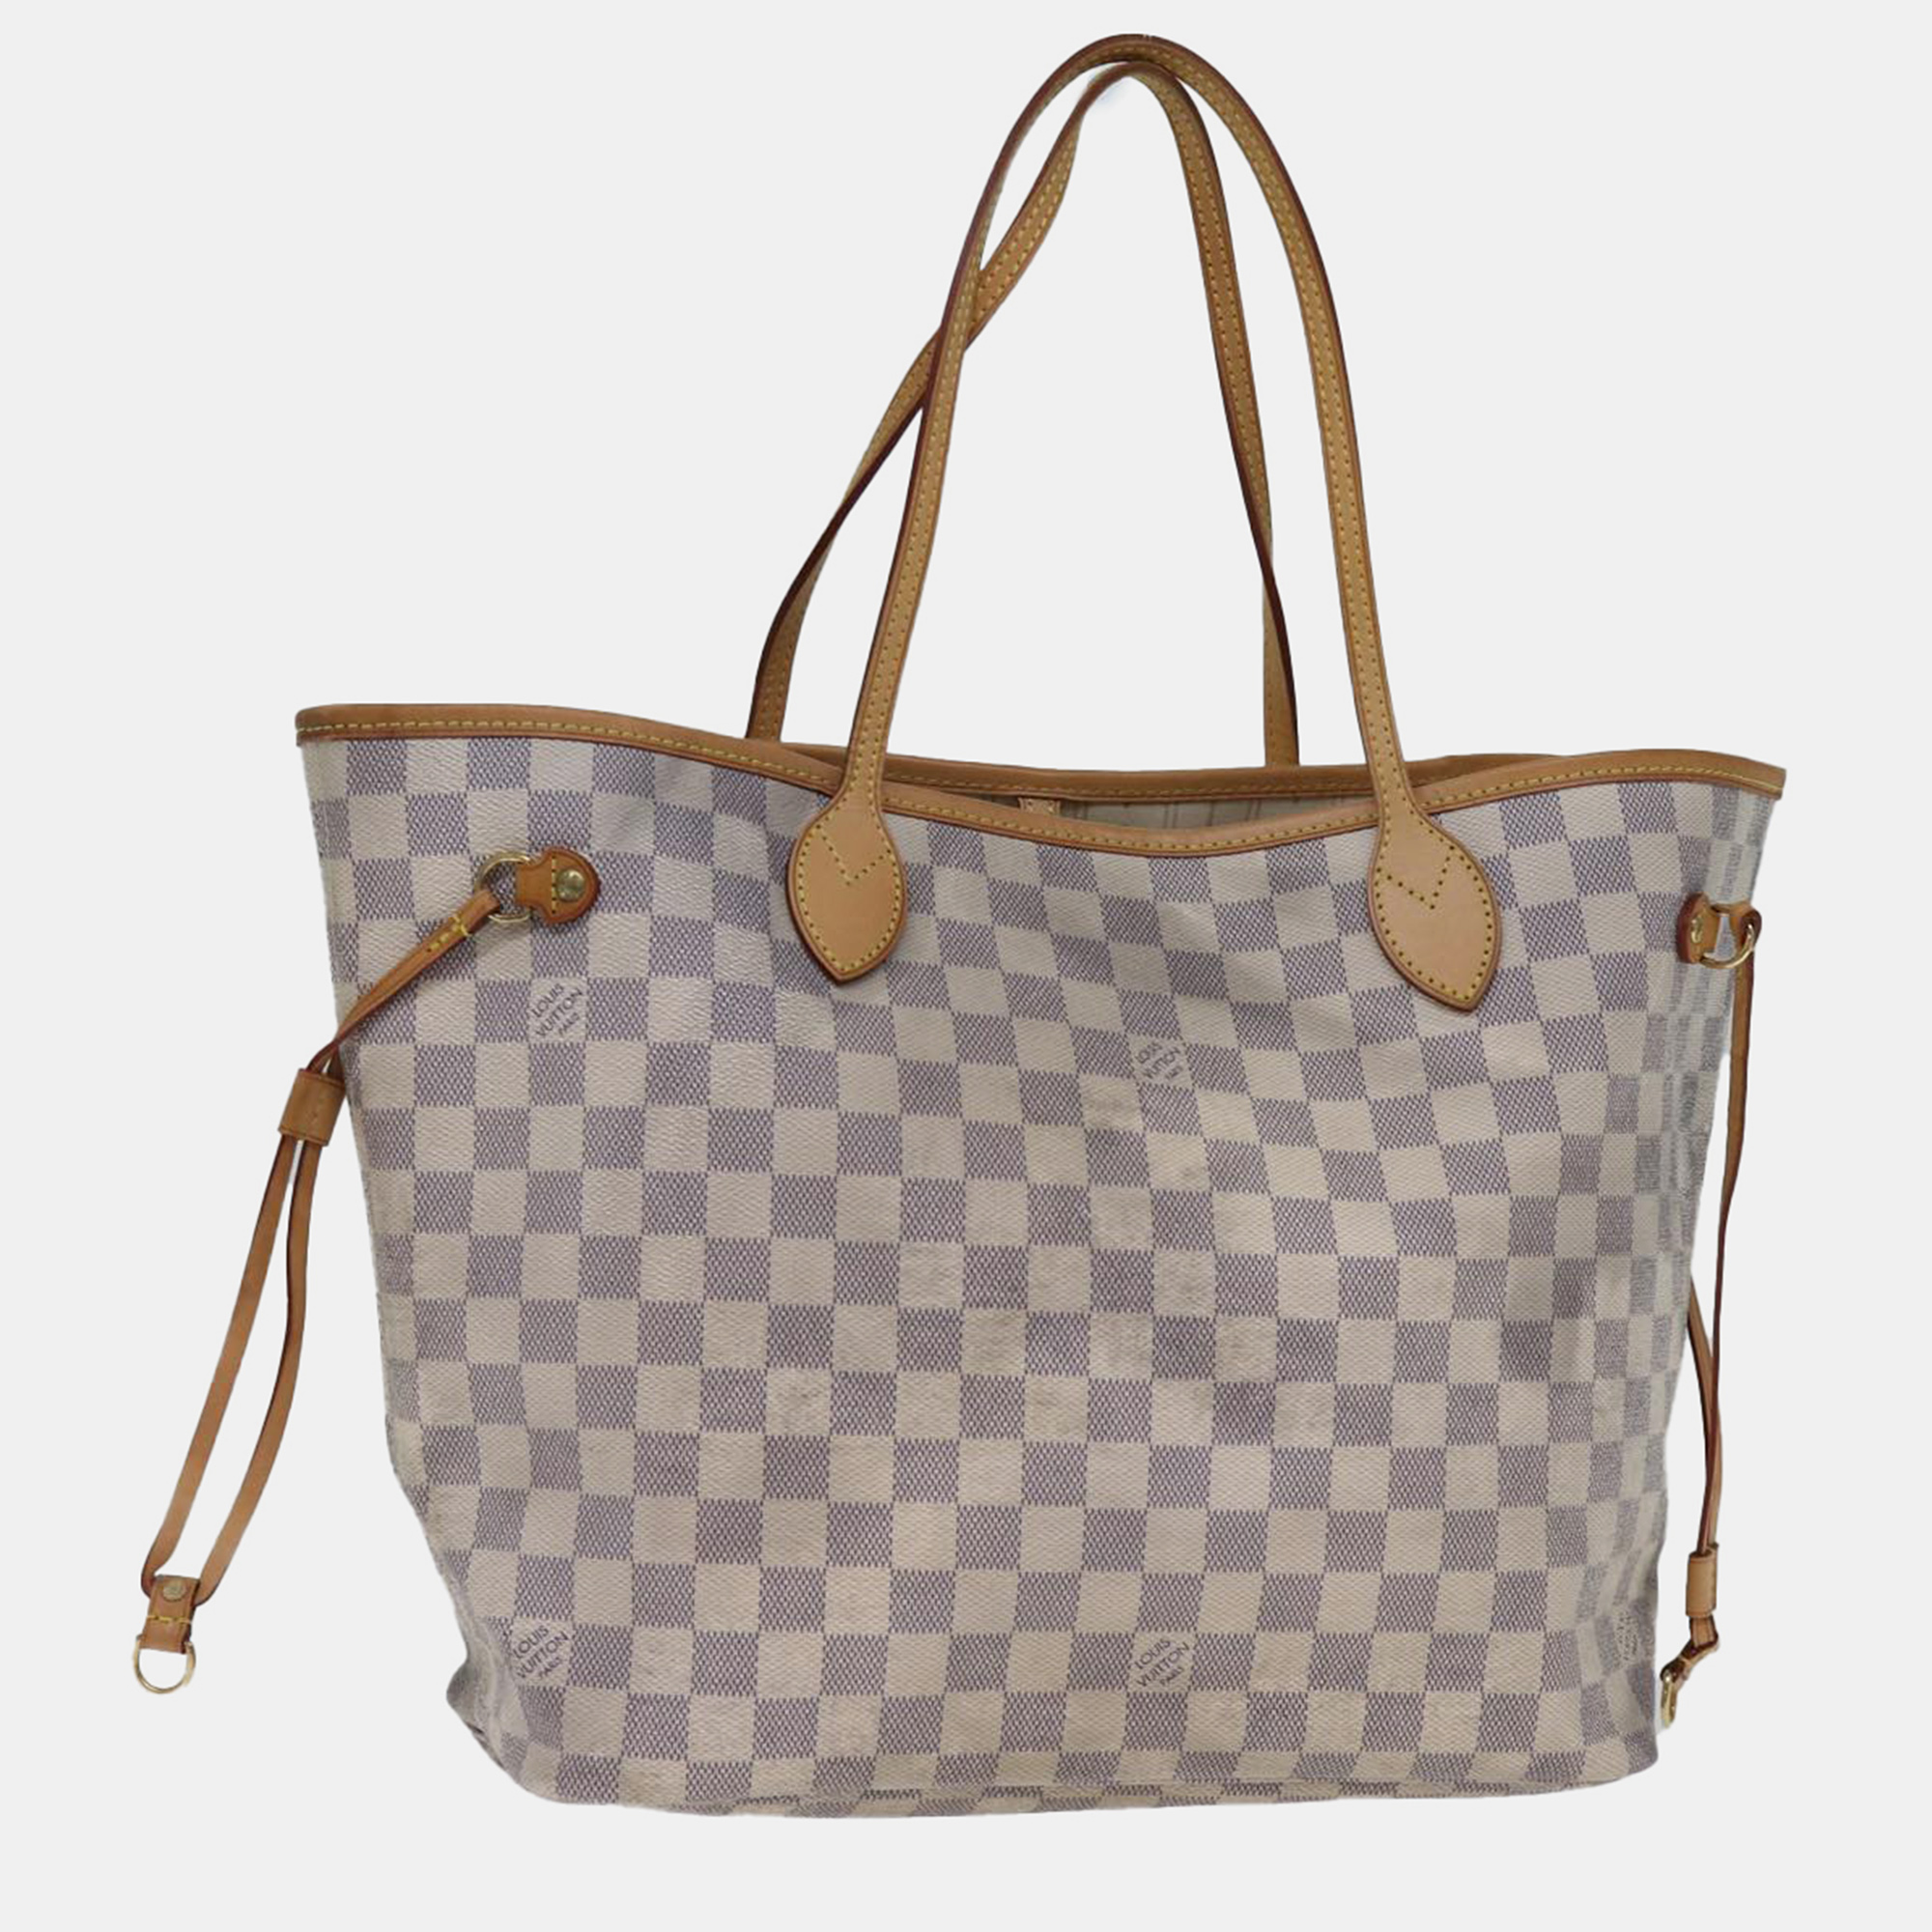 Louis vuitton grey/white canvas mm neverfull tote bag